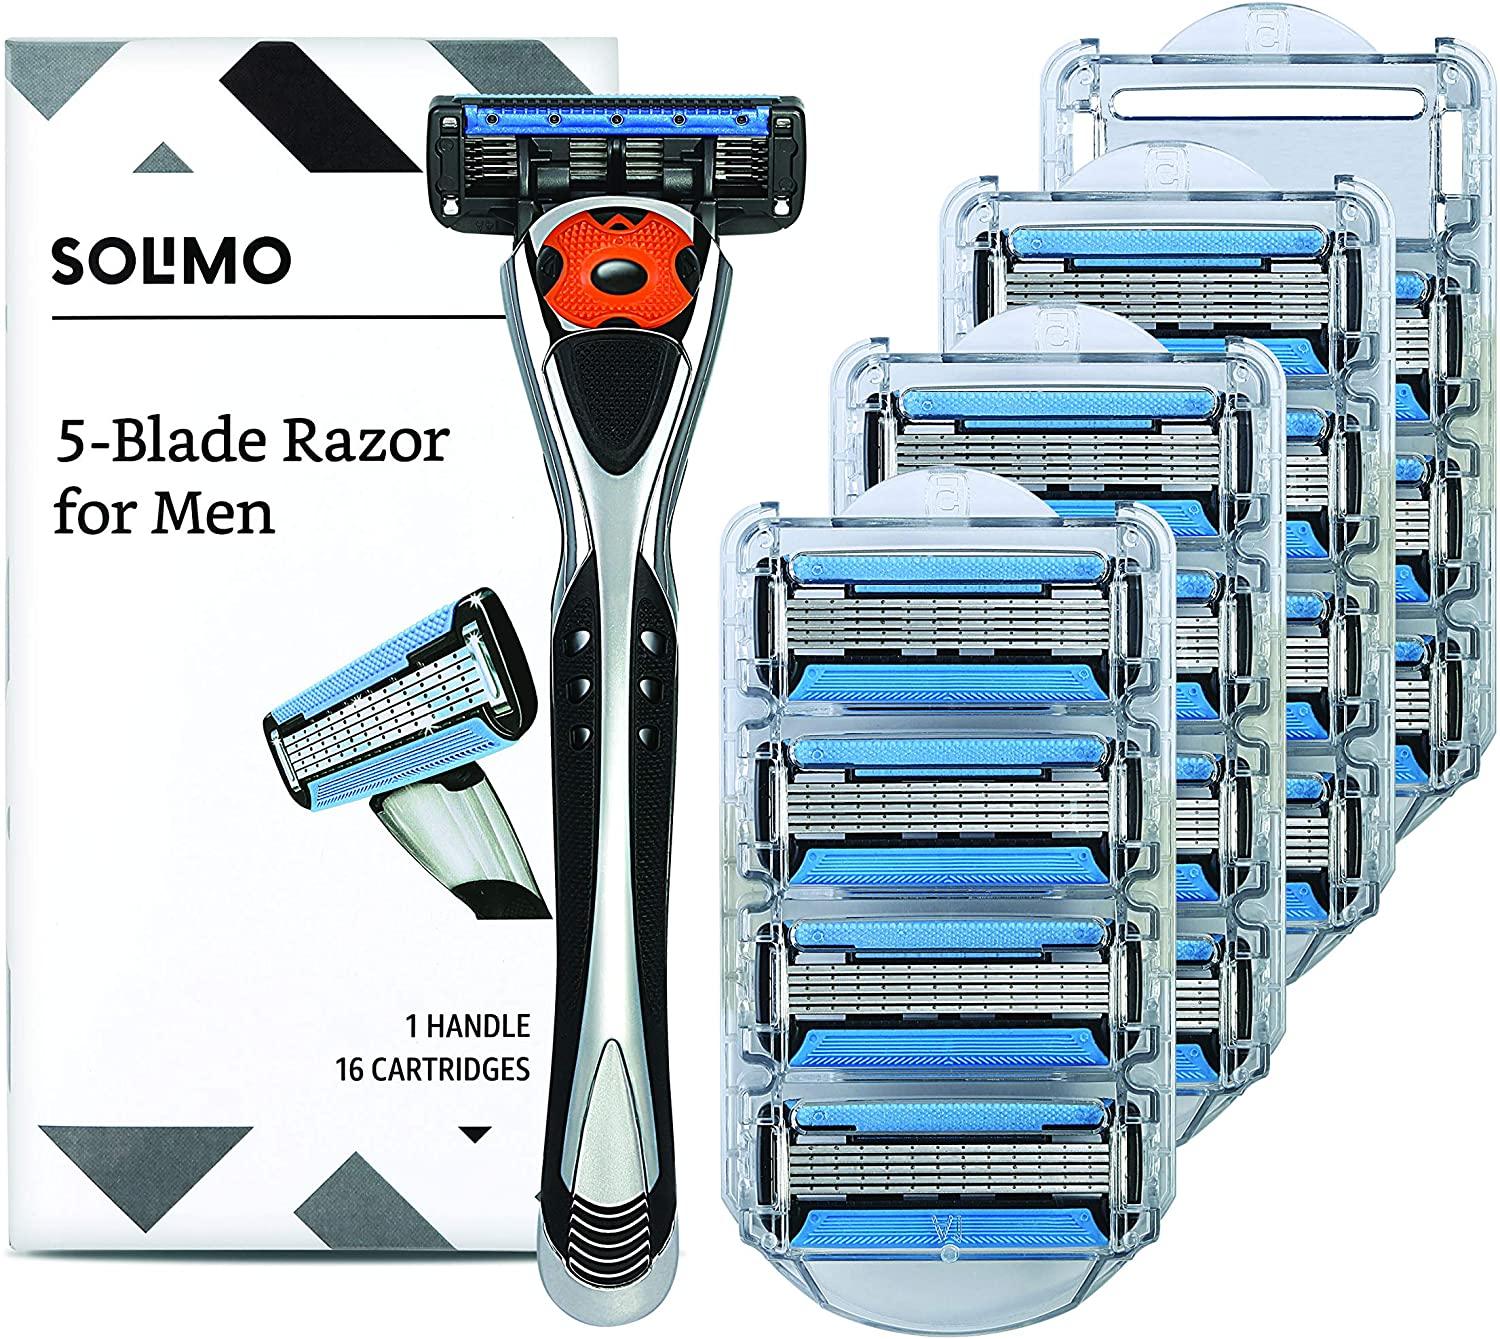 Solimo Mens 5-Blade MotionSphere Razor for $13.49 Shipped